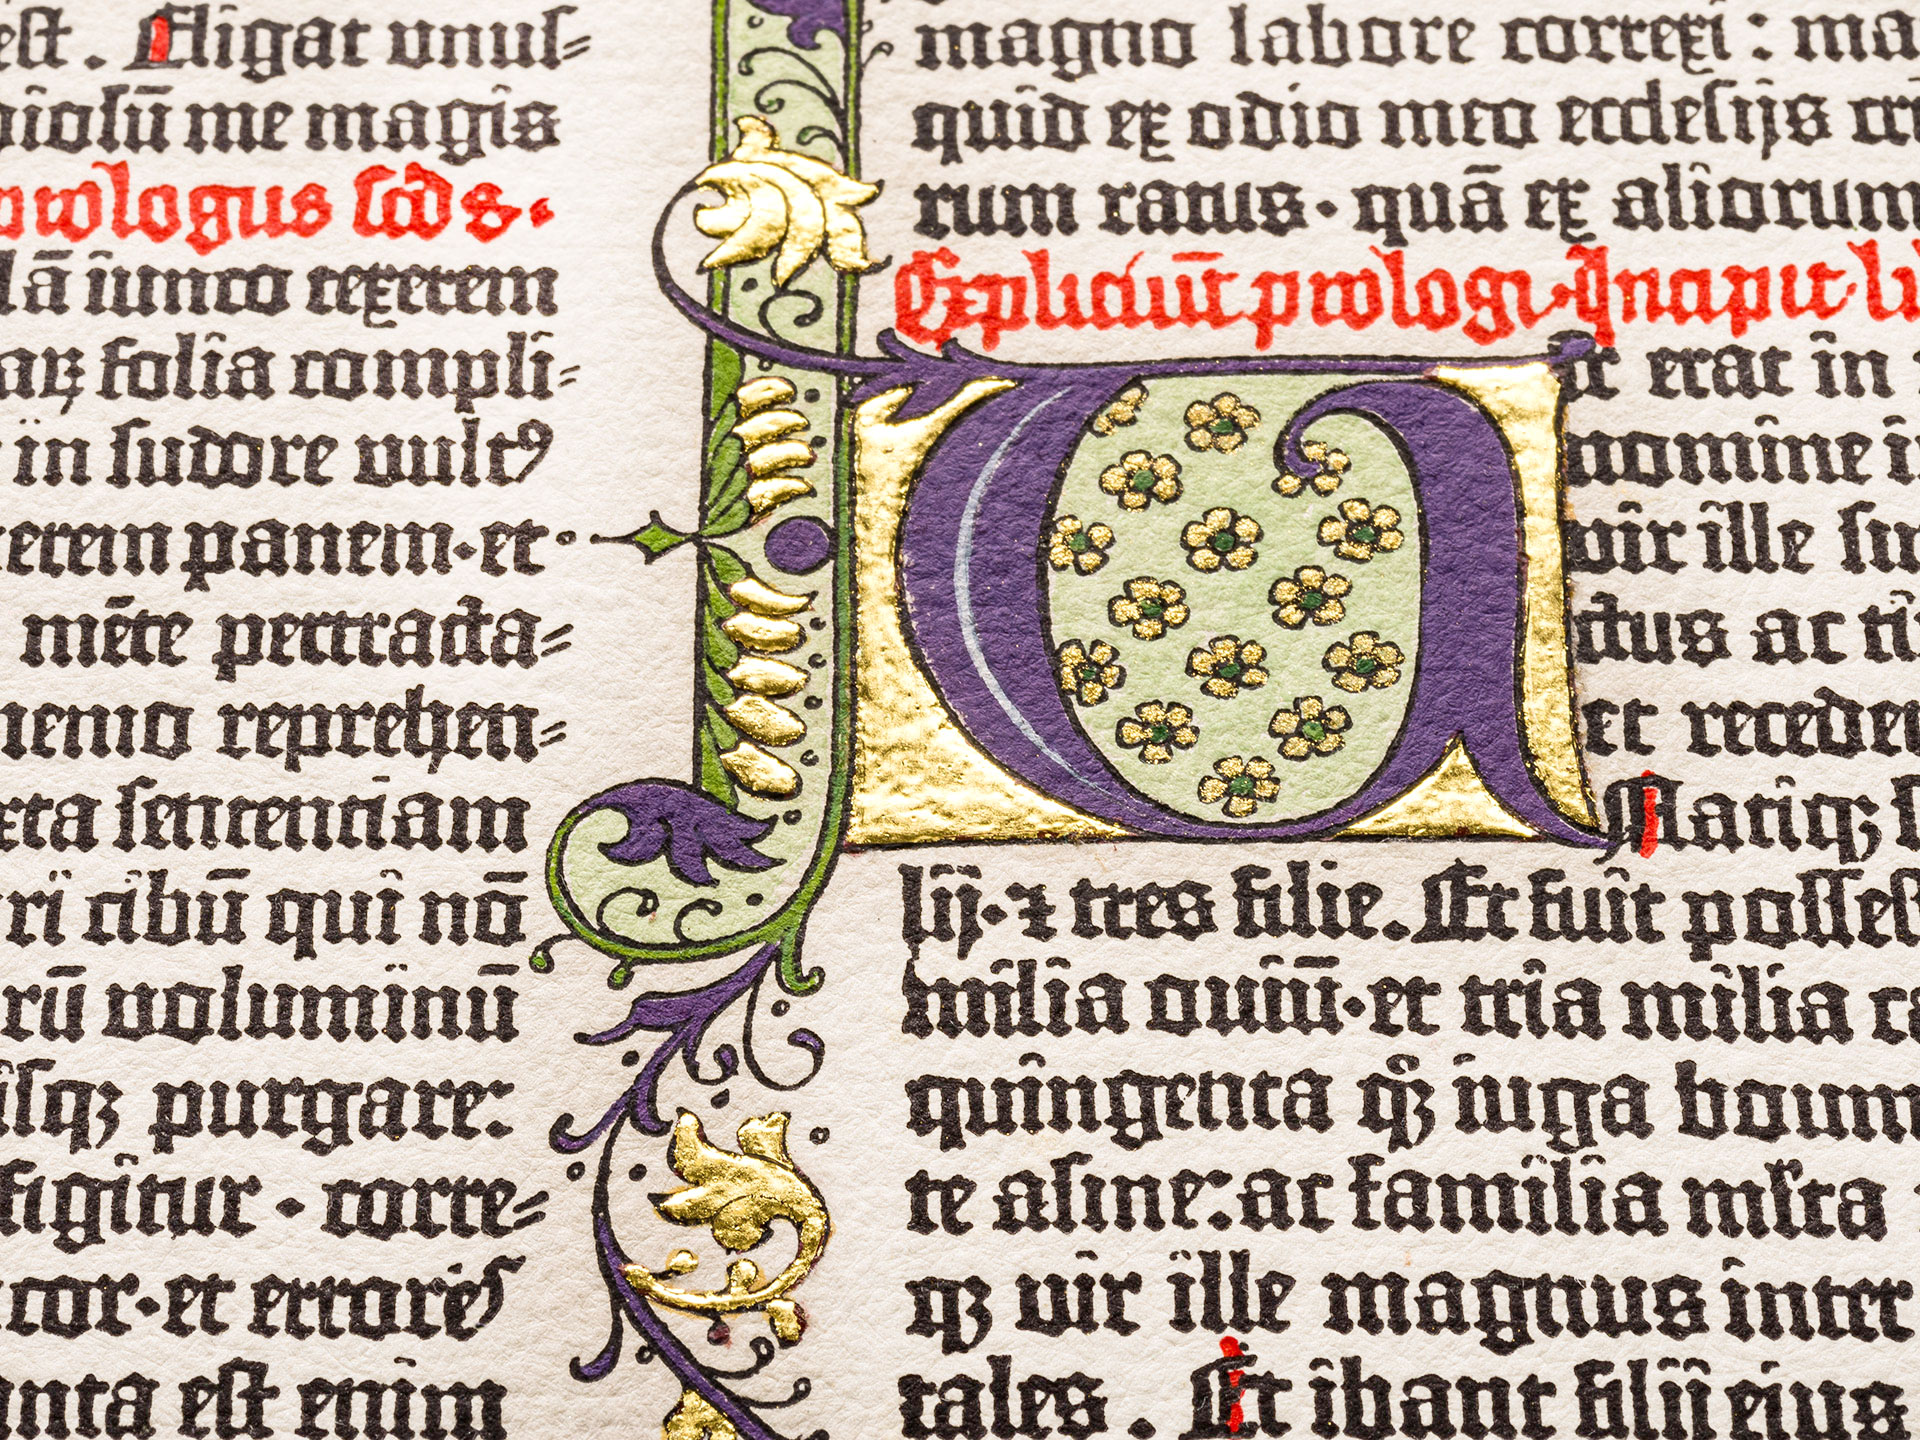 The Book of Job. Press print from the Gutenberg Bible